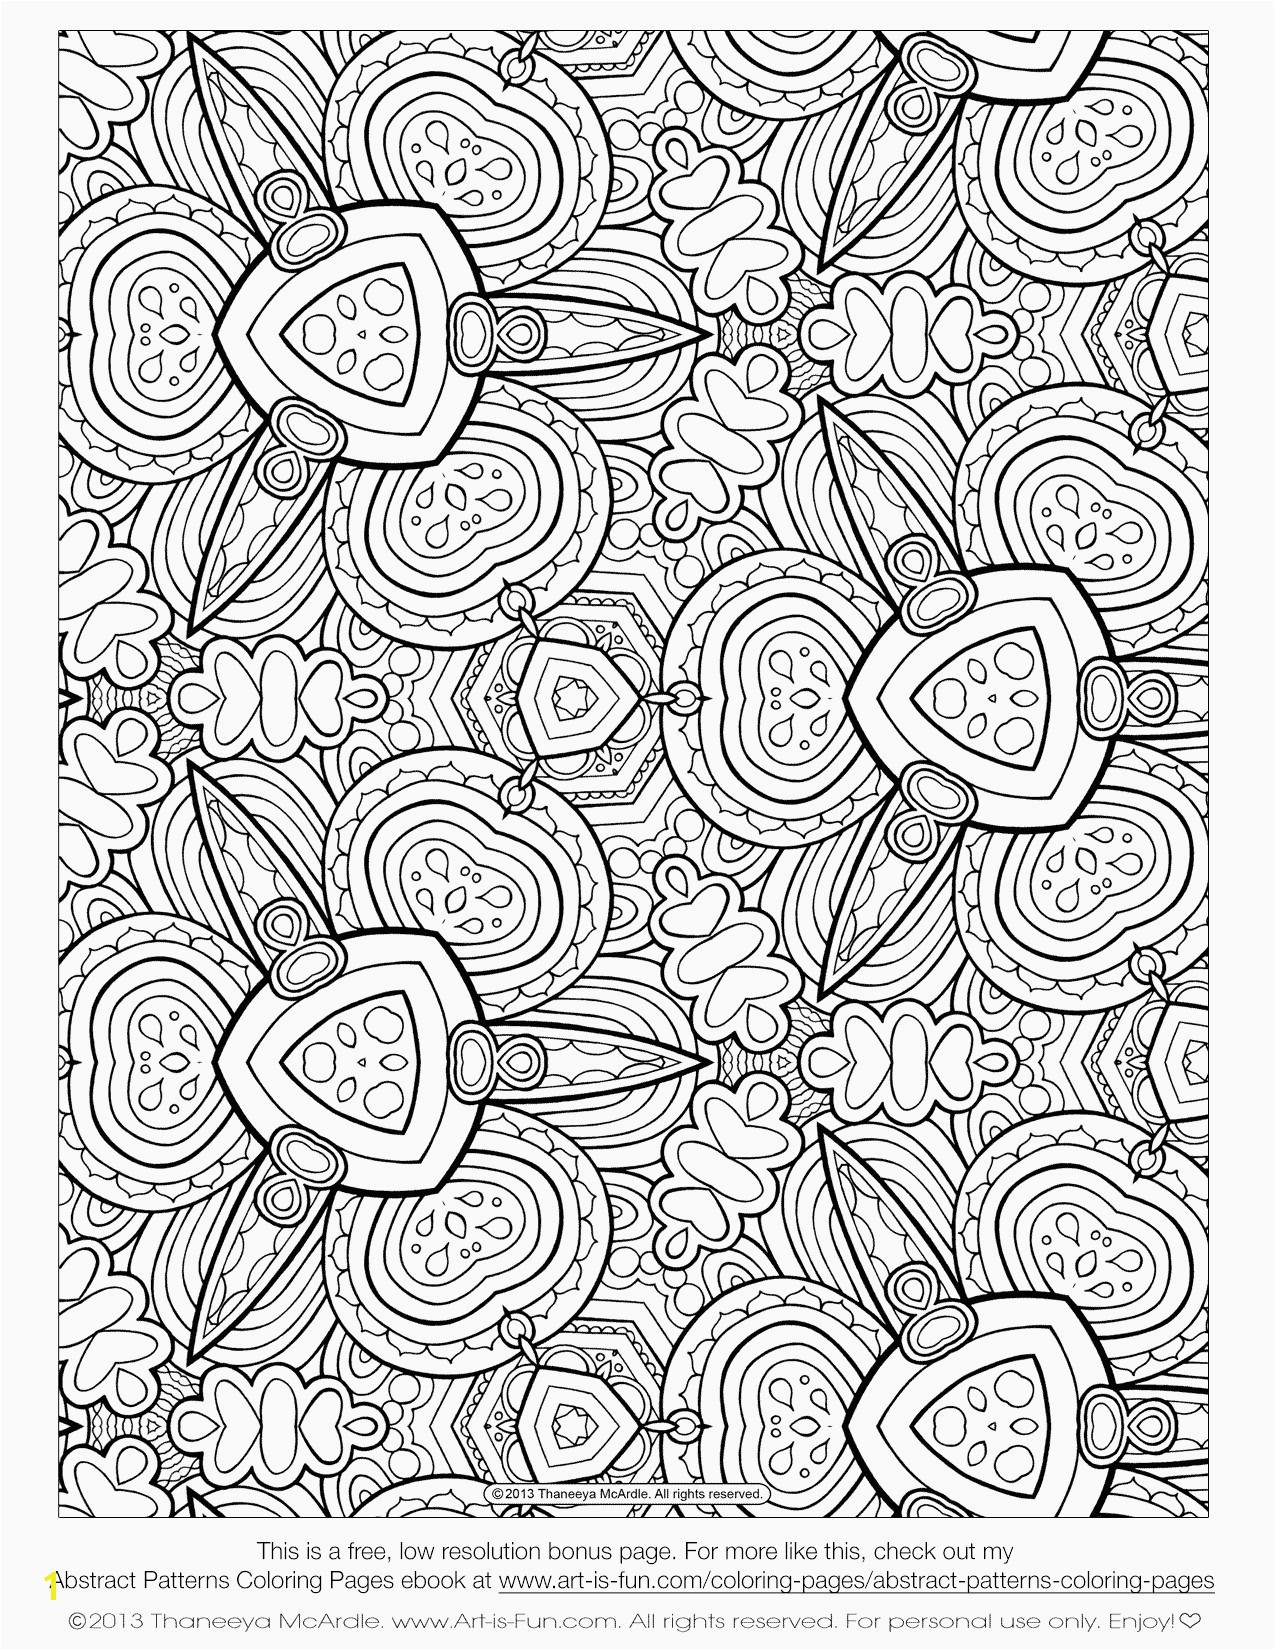 Fun Coloring Pages for Adults Online Line Coloring Pages for Adults Cool Coloring Pages